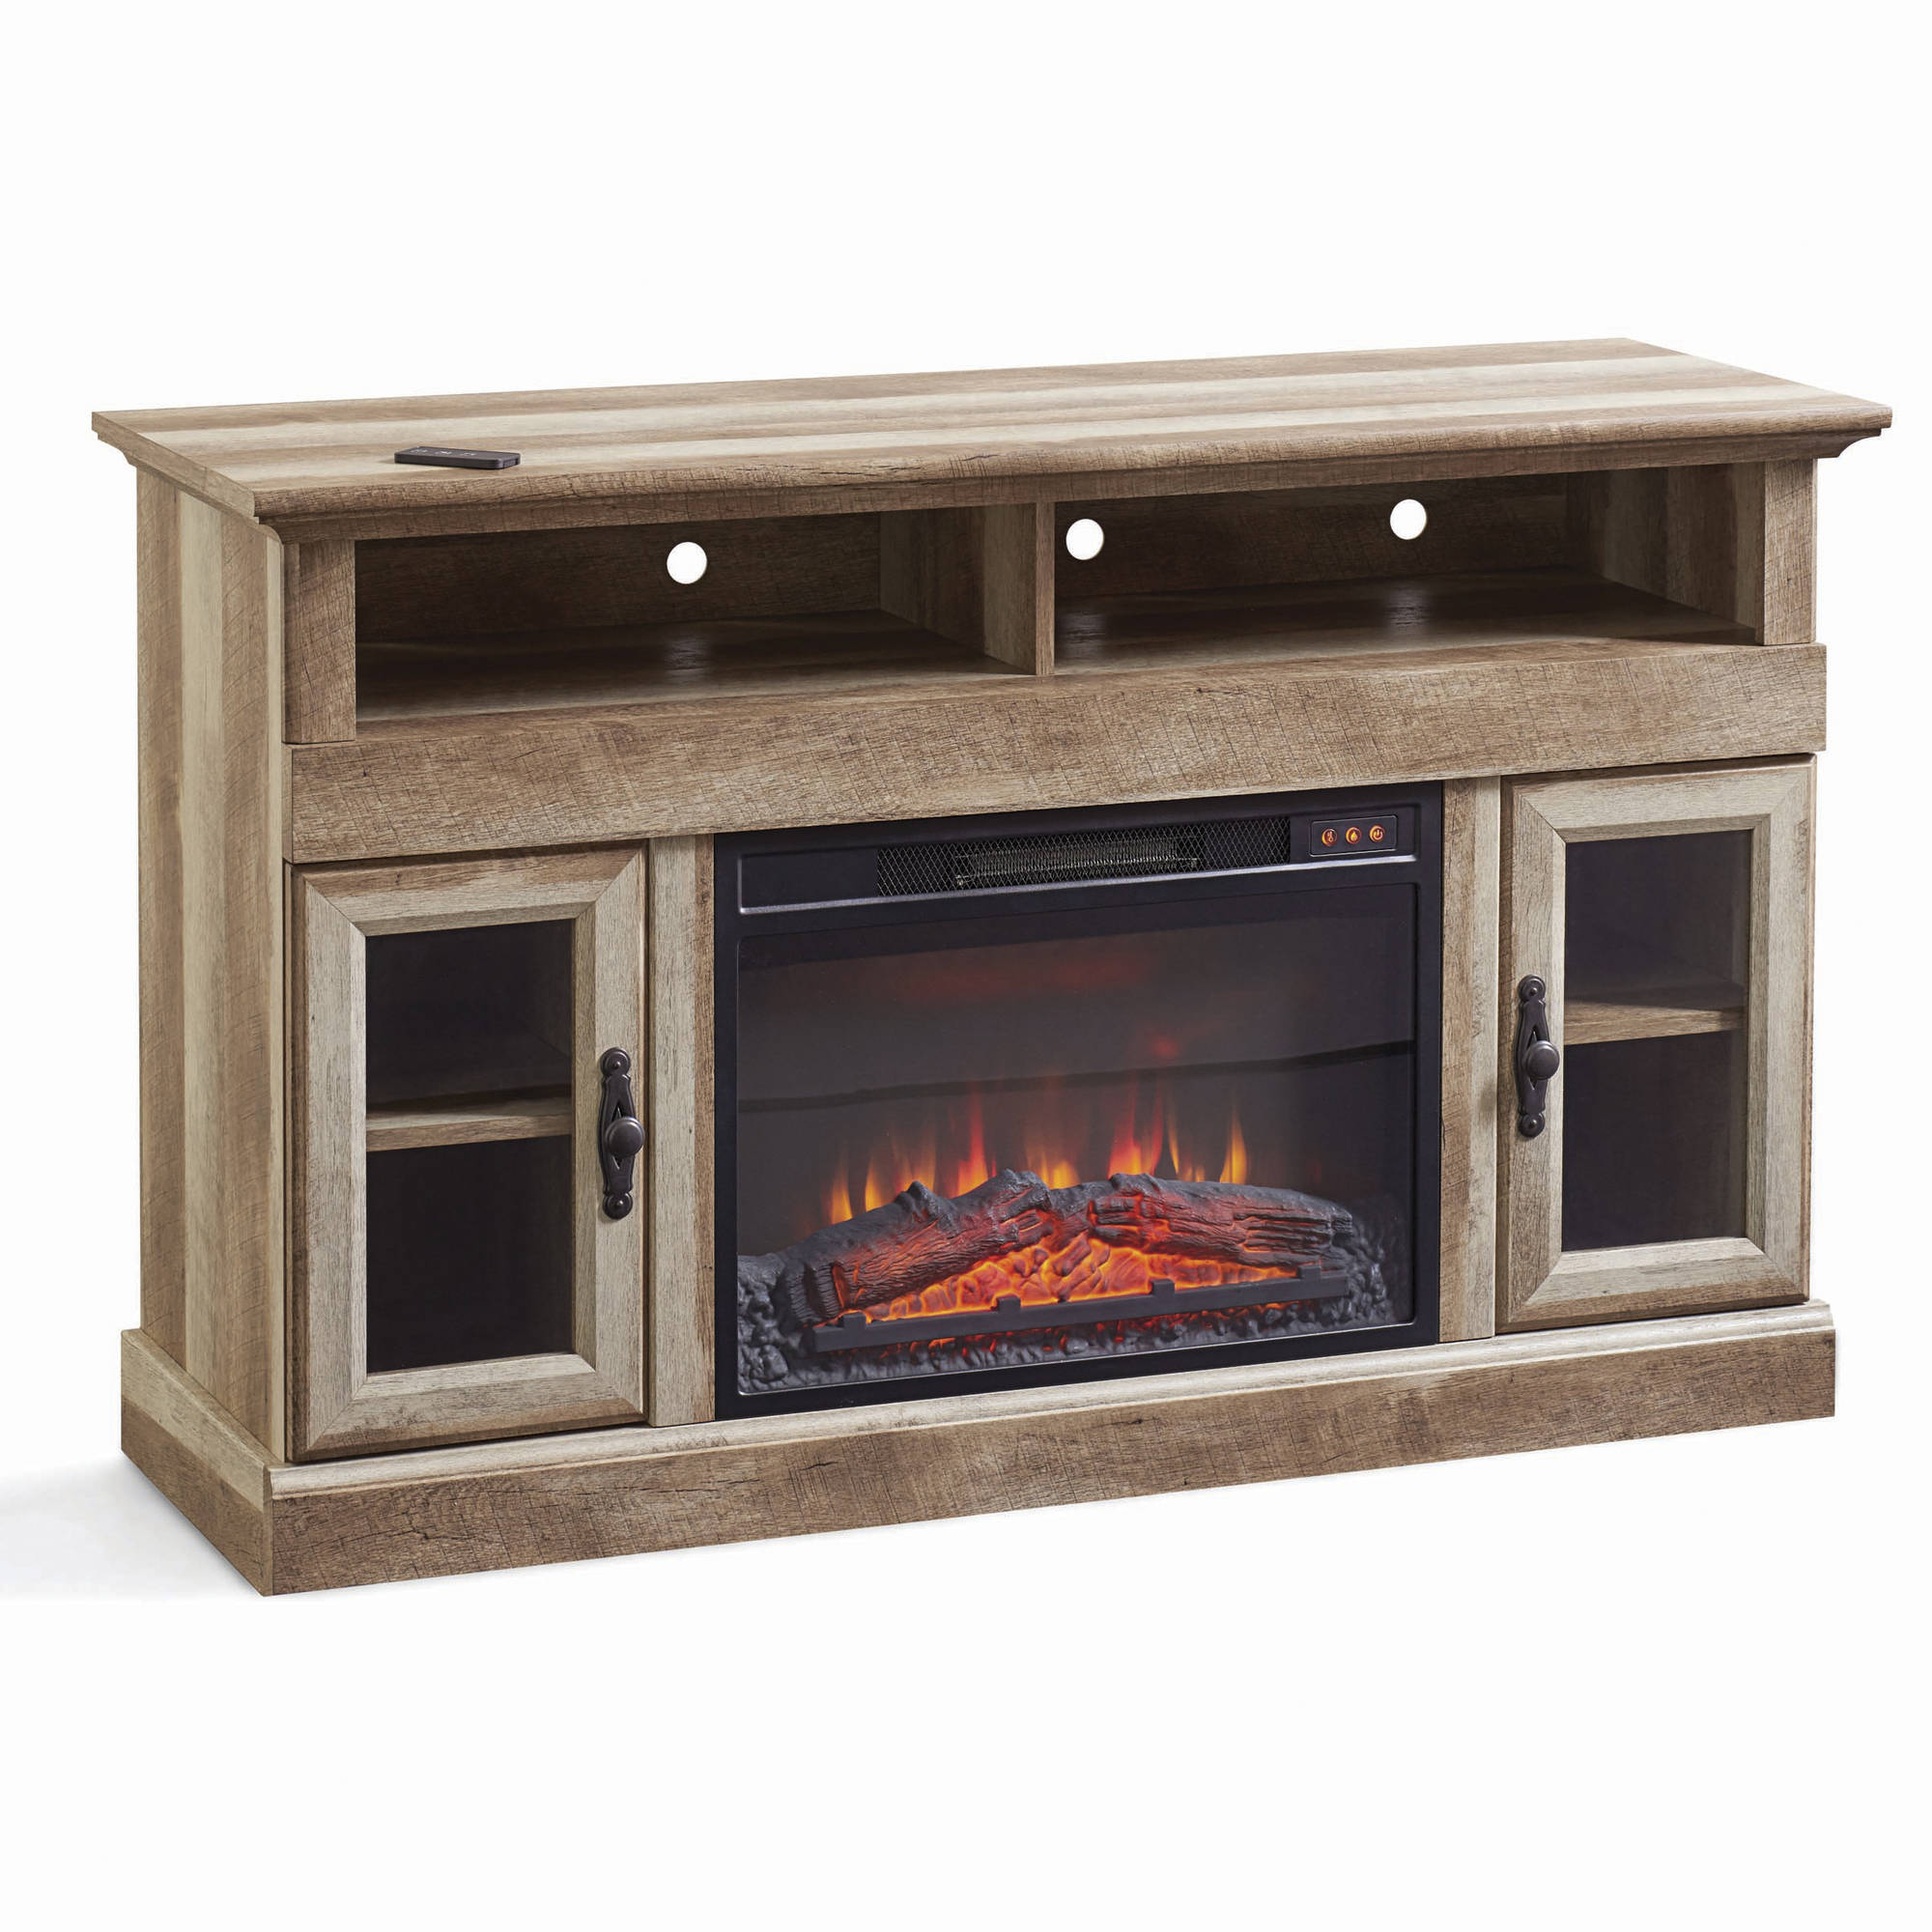 Better Homes & Gardens Crossmill Fireplace Media Console, for TVs up to 60", Weathered Pine Finish - image 4 of 8